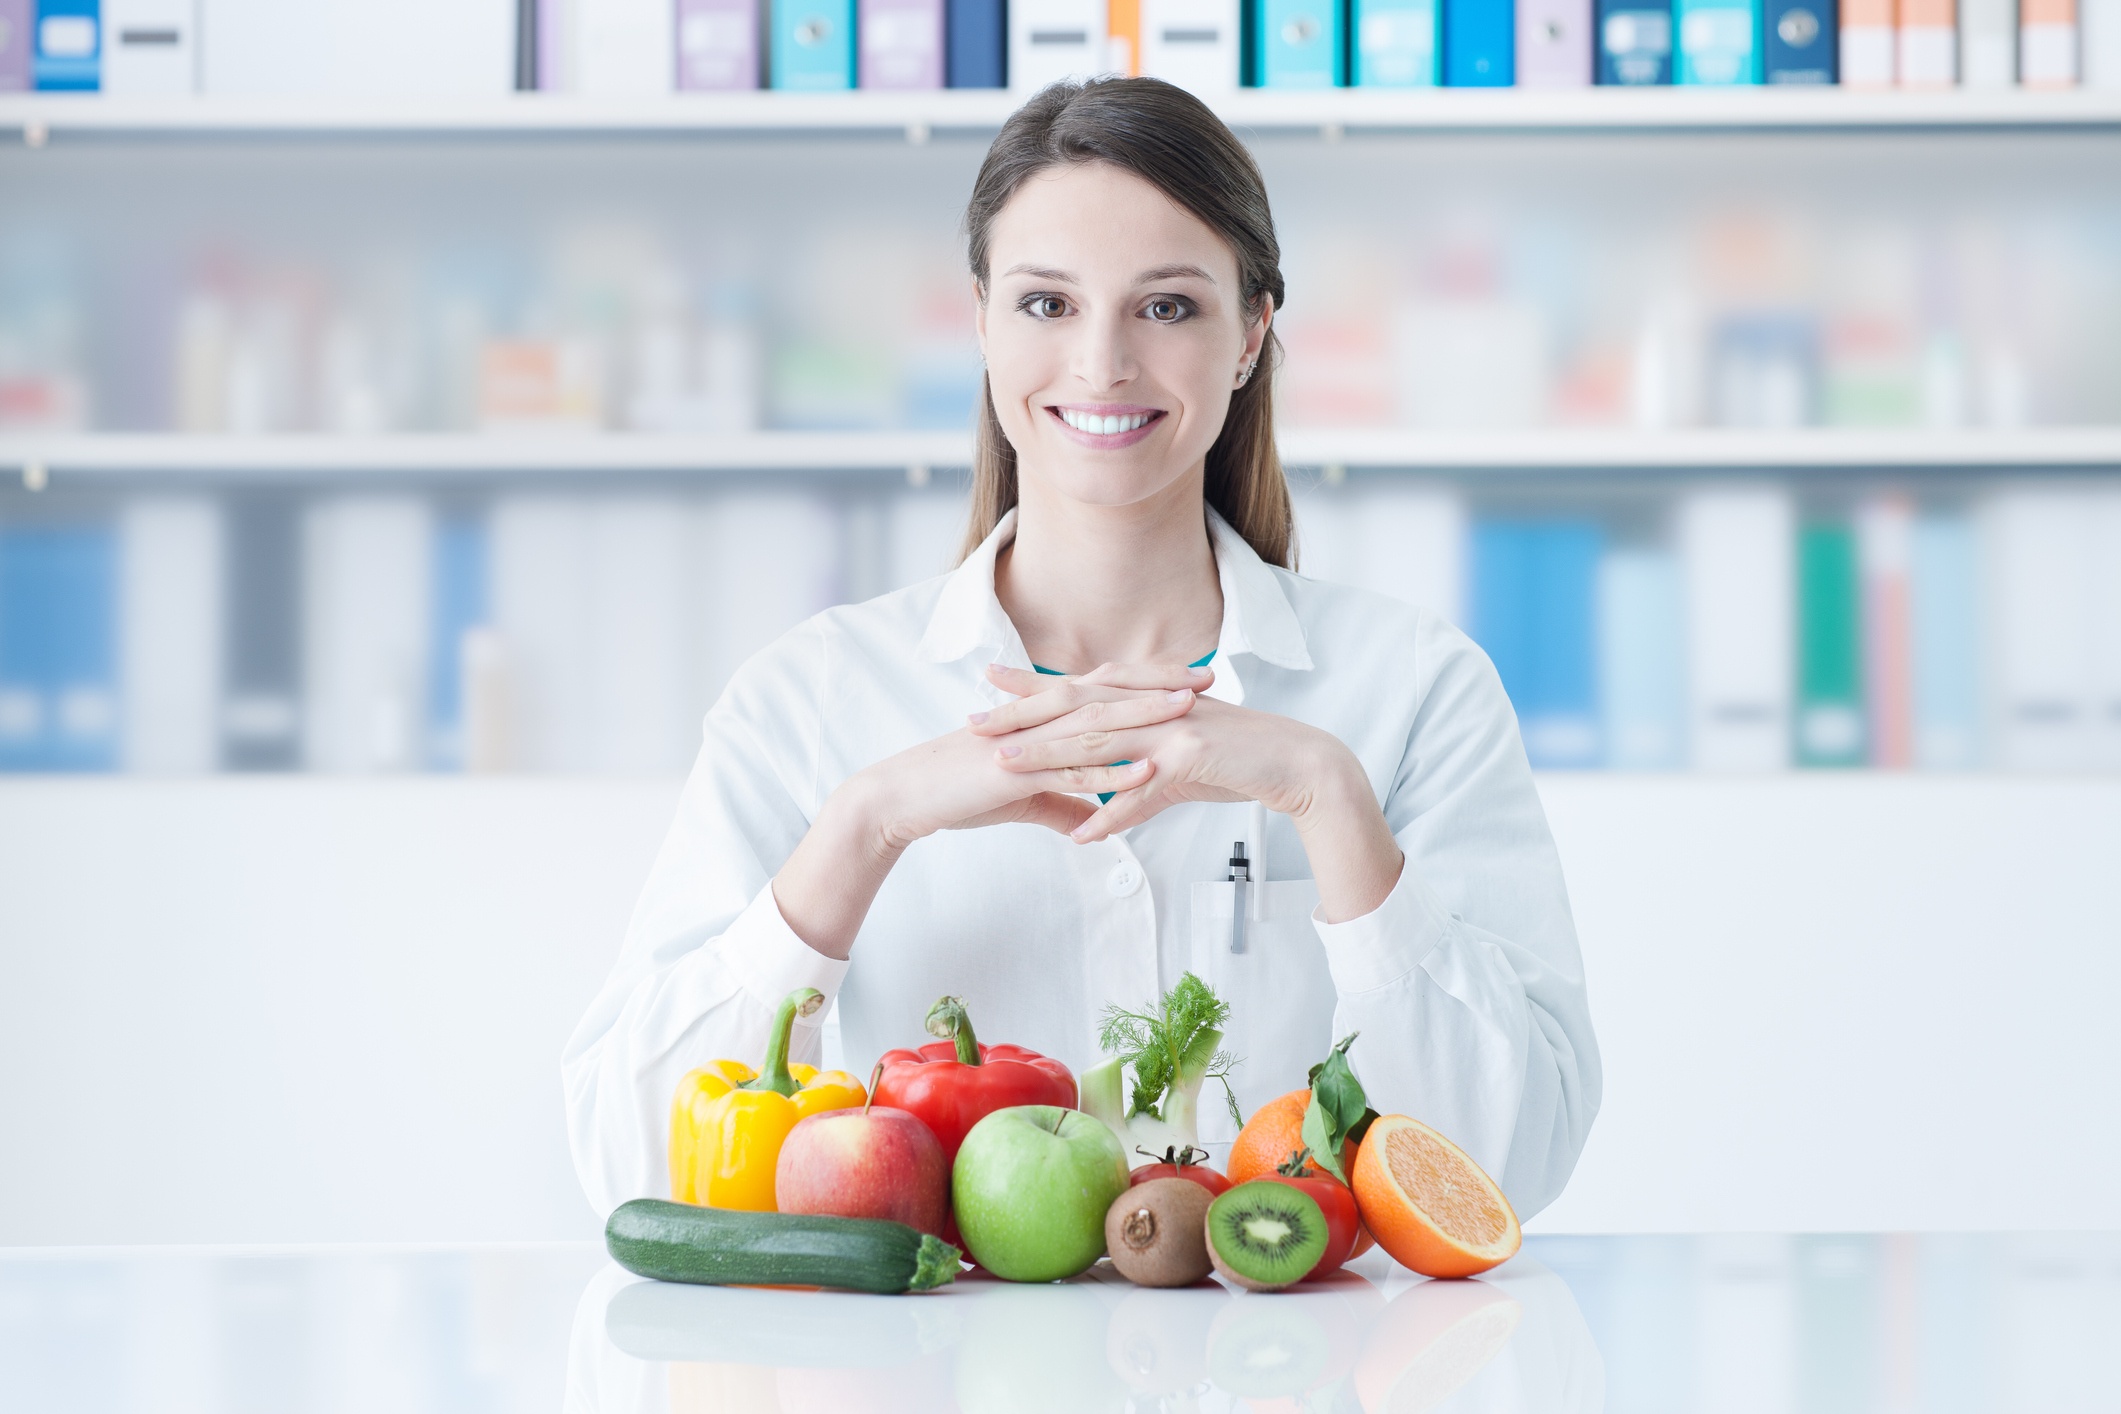 What You Need To Know To Become A Certified Nutritionist